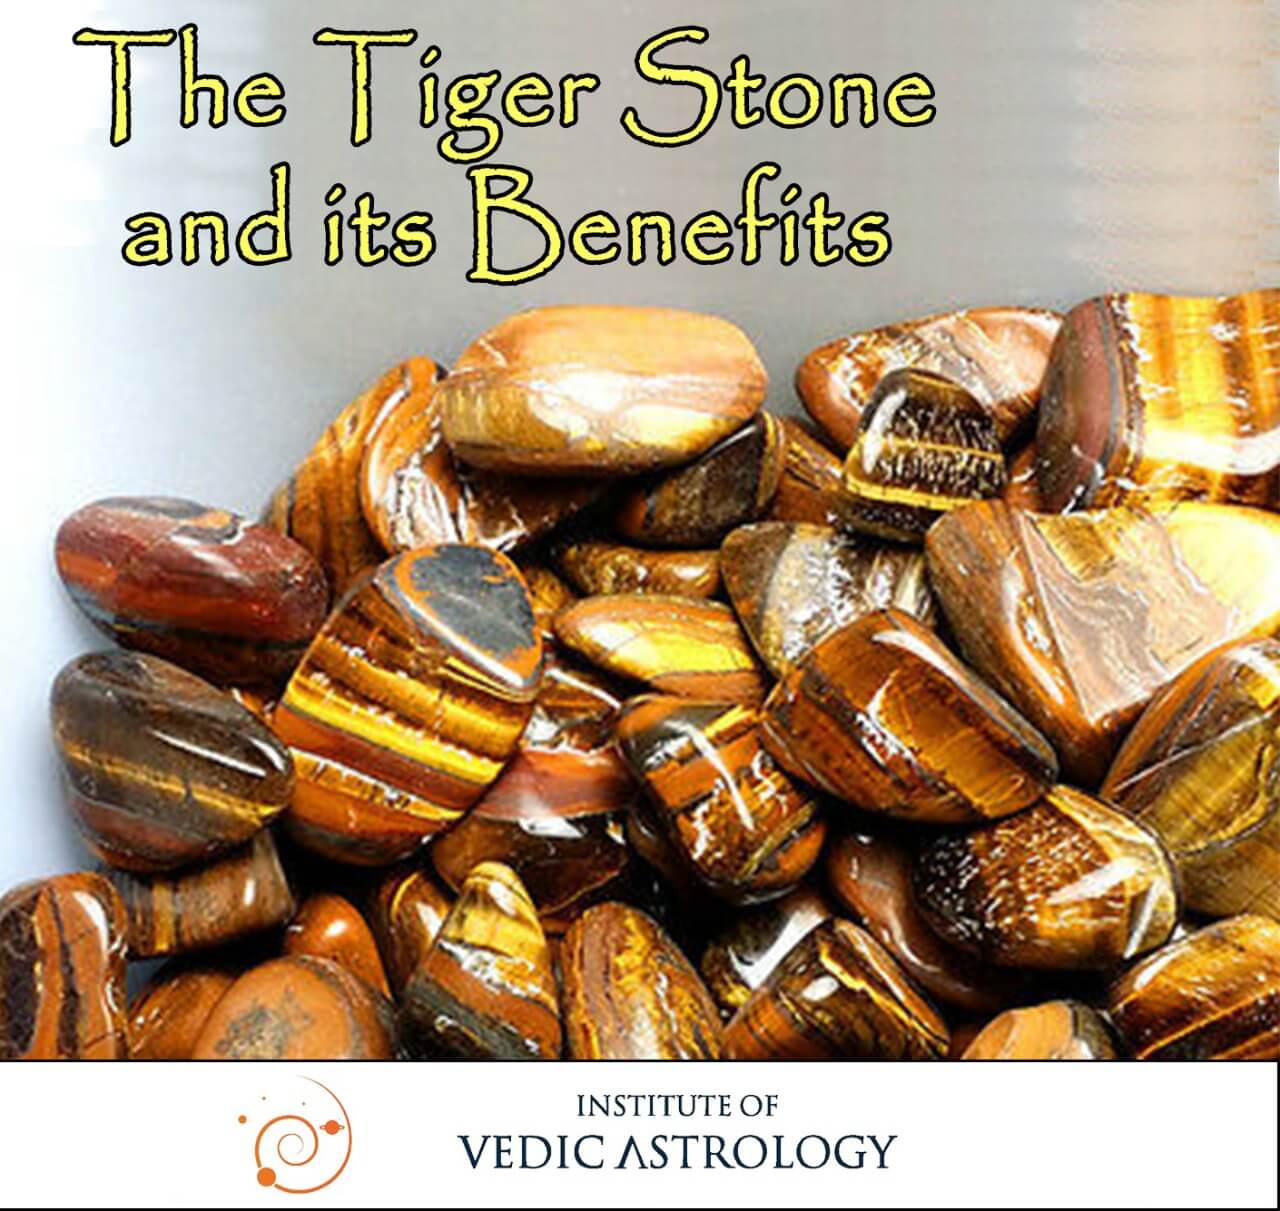 The Tiger Stone and its benefits